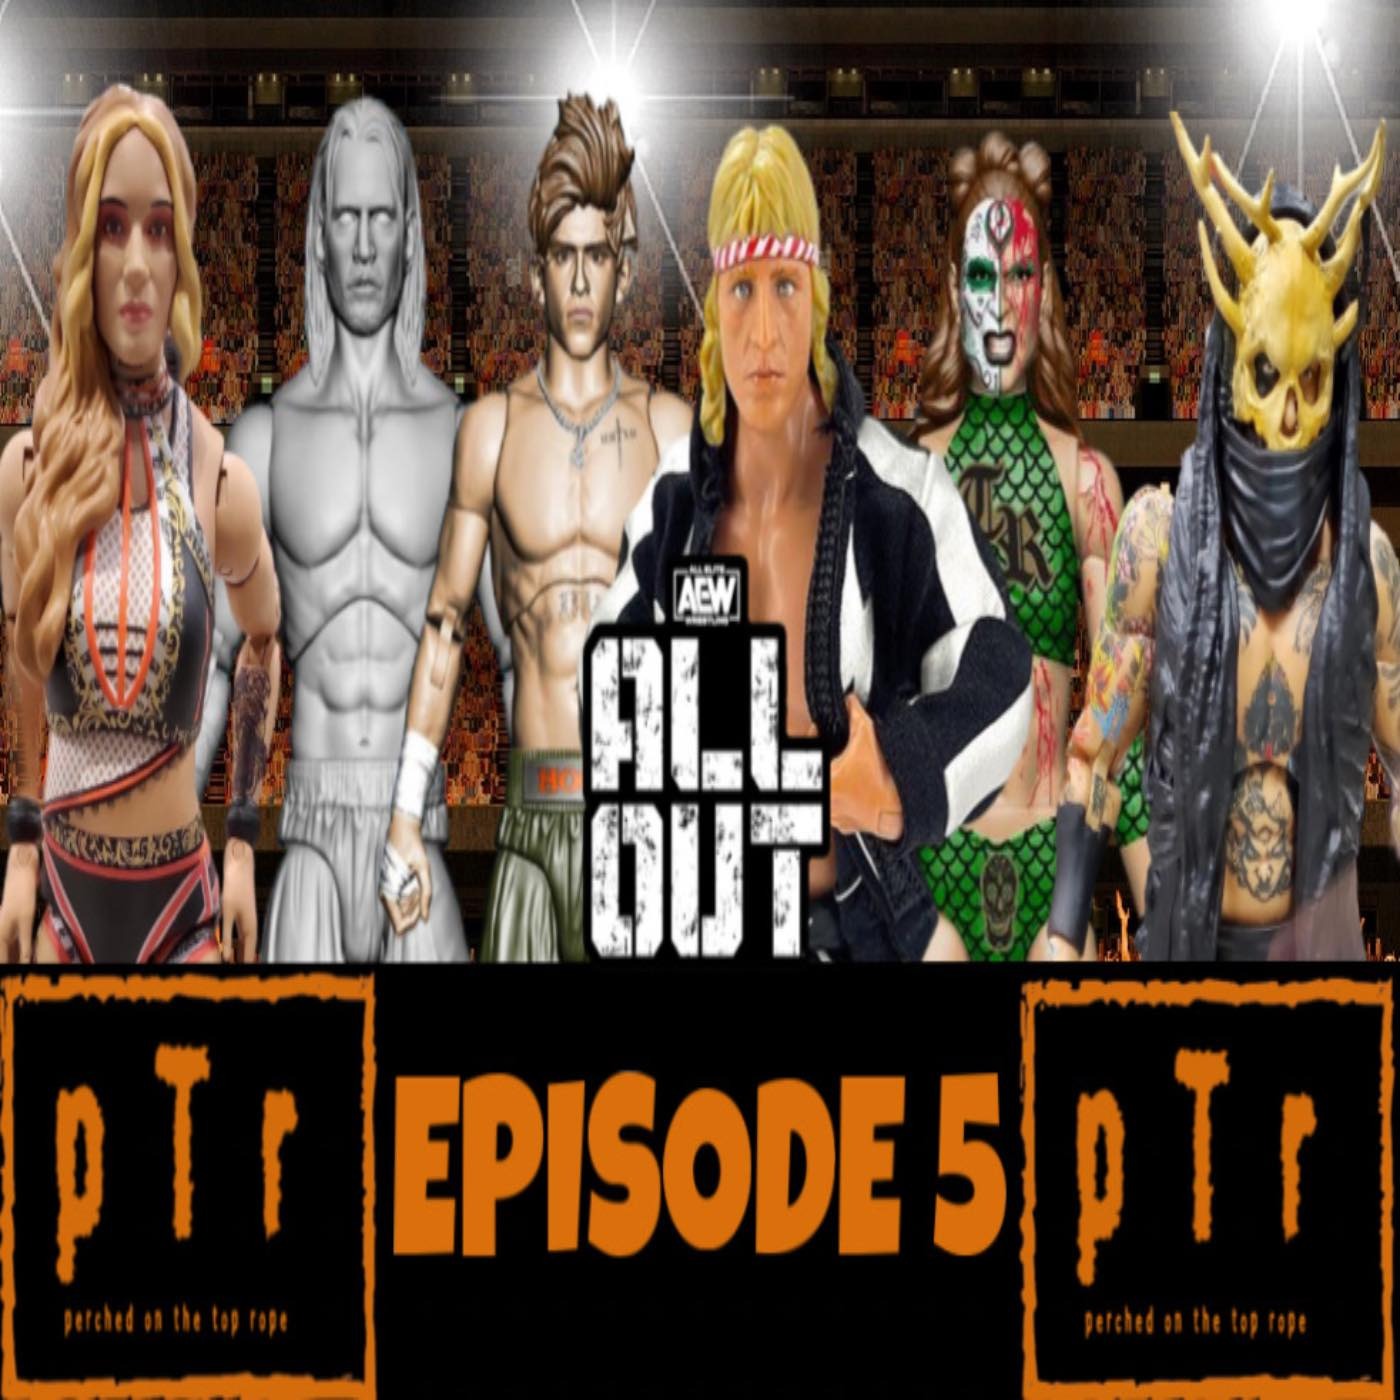 Perched On The Top Self: Episode 5 A Review of the NEW AEW Figures,  WWE Elite and Micro Brawler  Unboxing